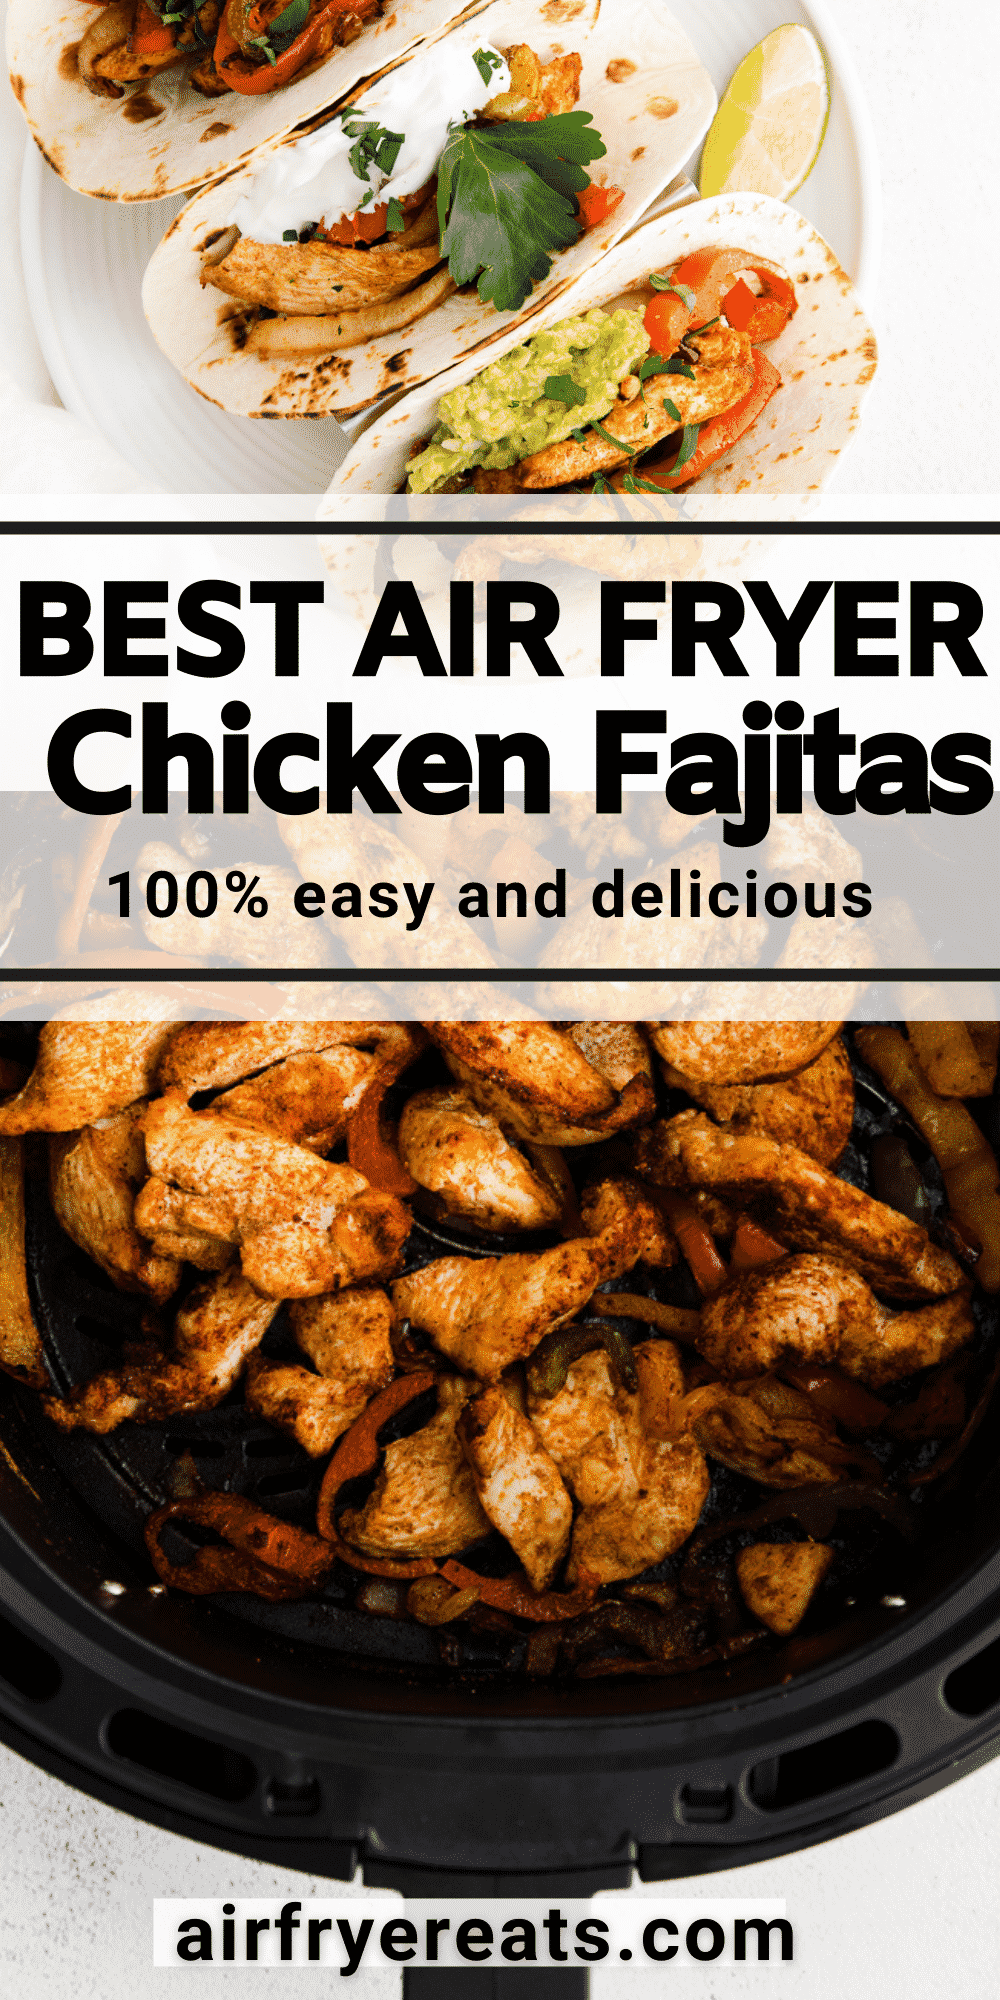 Air Fryer Chicken Fajitas are a deliciously seasoned mix of boneless chicken breast strips, peppers and onions that cook up quickly and easily, ready to fill warm tortillas for dinner. #airfryer #fajitas via @vegetarianmamma